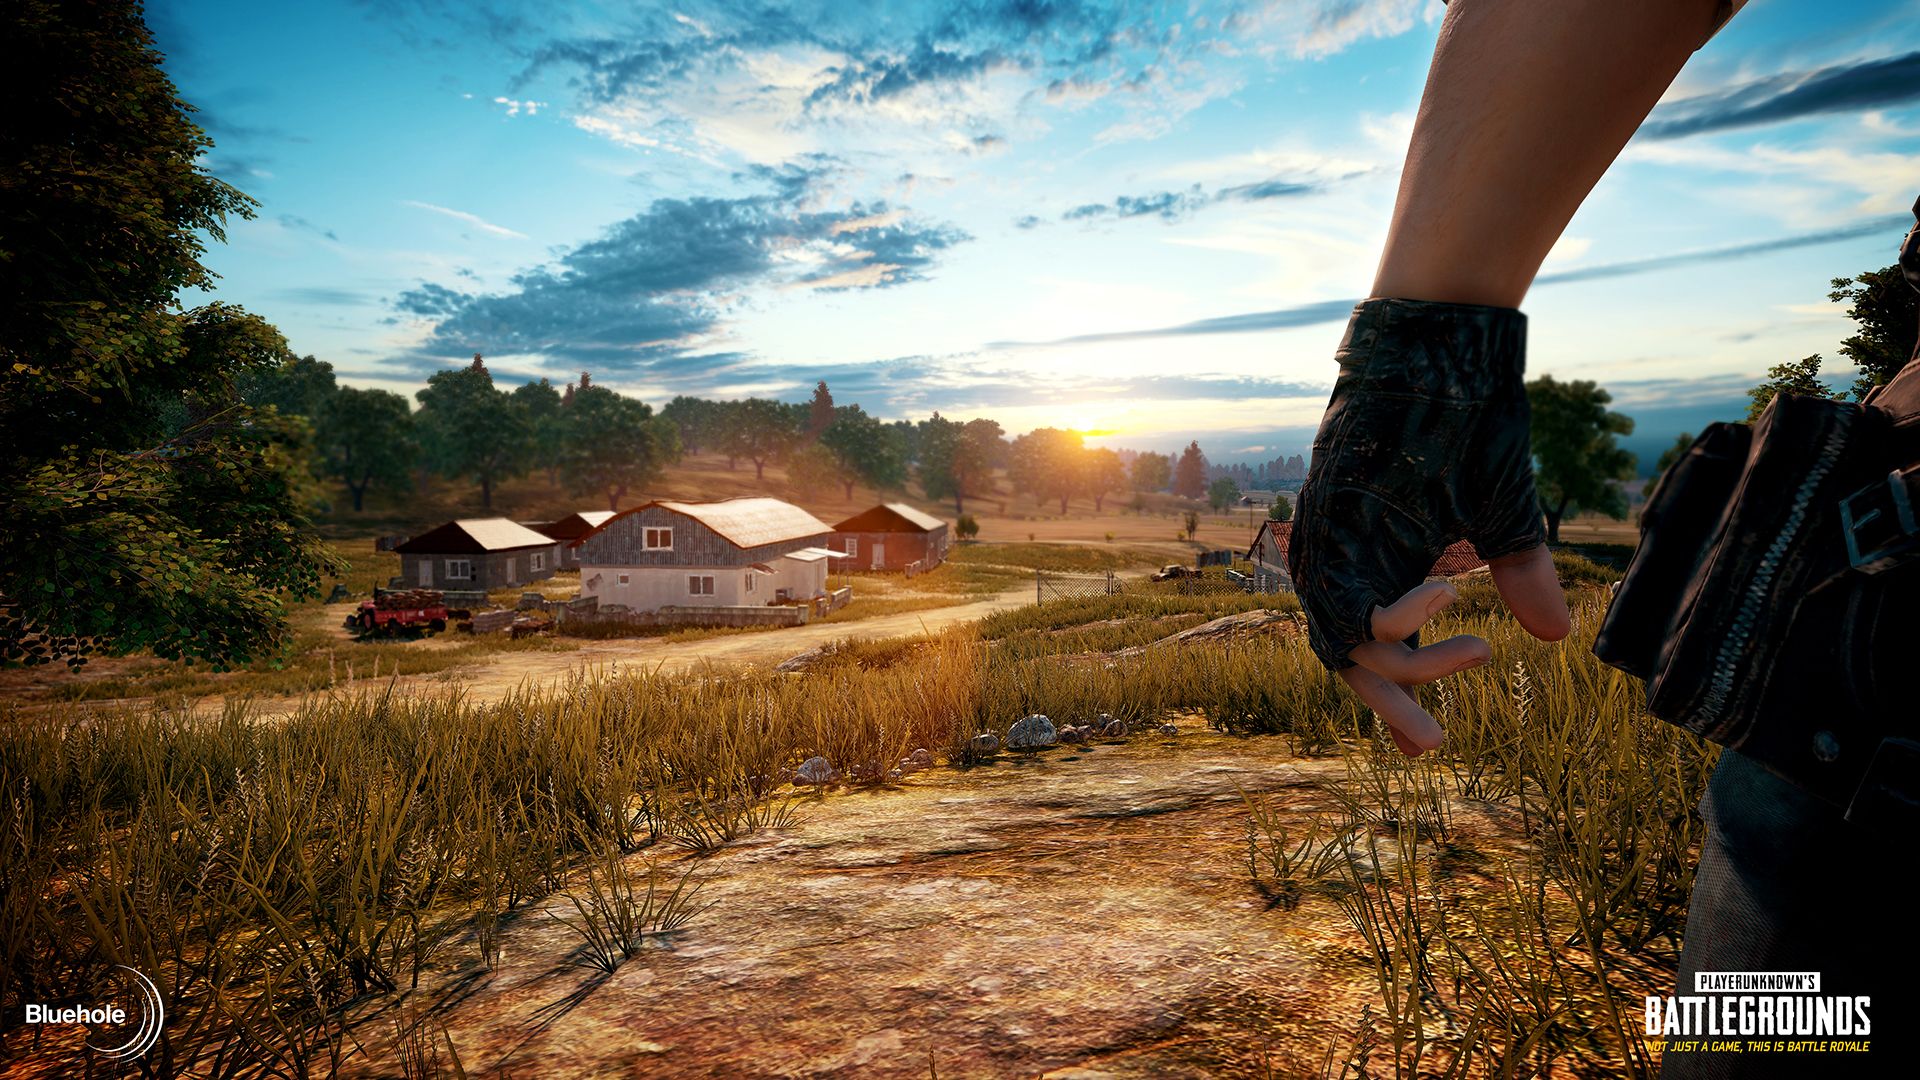 wp2208724 pubg wallpapers - Player Unknown’s Battlegrounds (PUBG) 4K - Pubg wallpaper phone, pubg wallpaper iphone, pubg wallpaper 1920x1080 hd, pubg hd wallpapers, pubg 4k wallpapers, Player Unknown's Battlegrounds 4k wallpapers